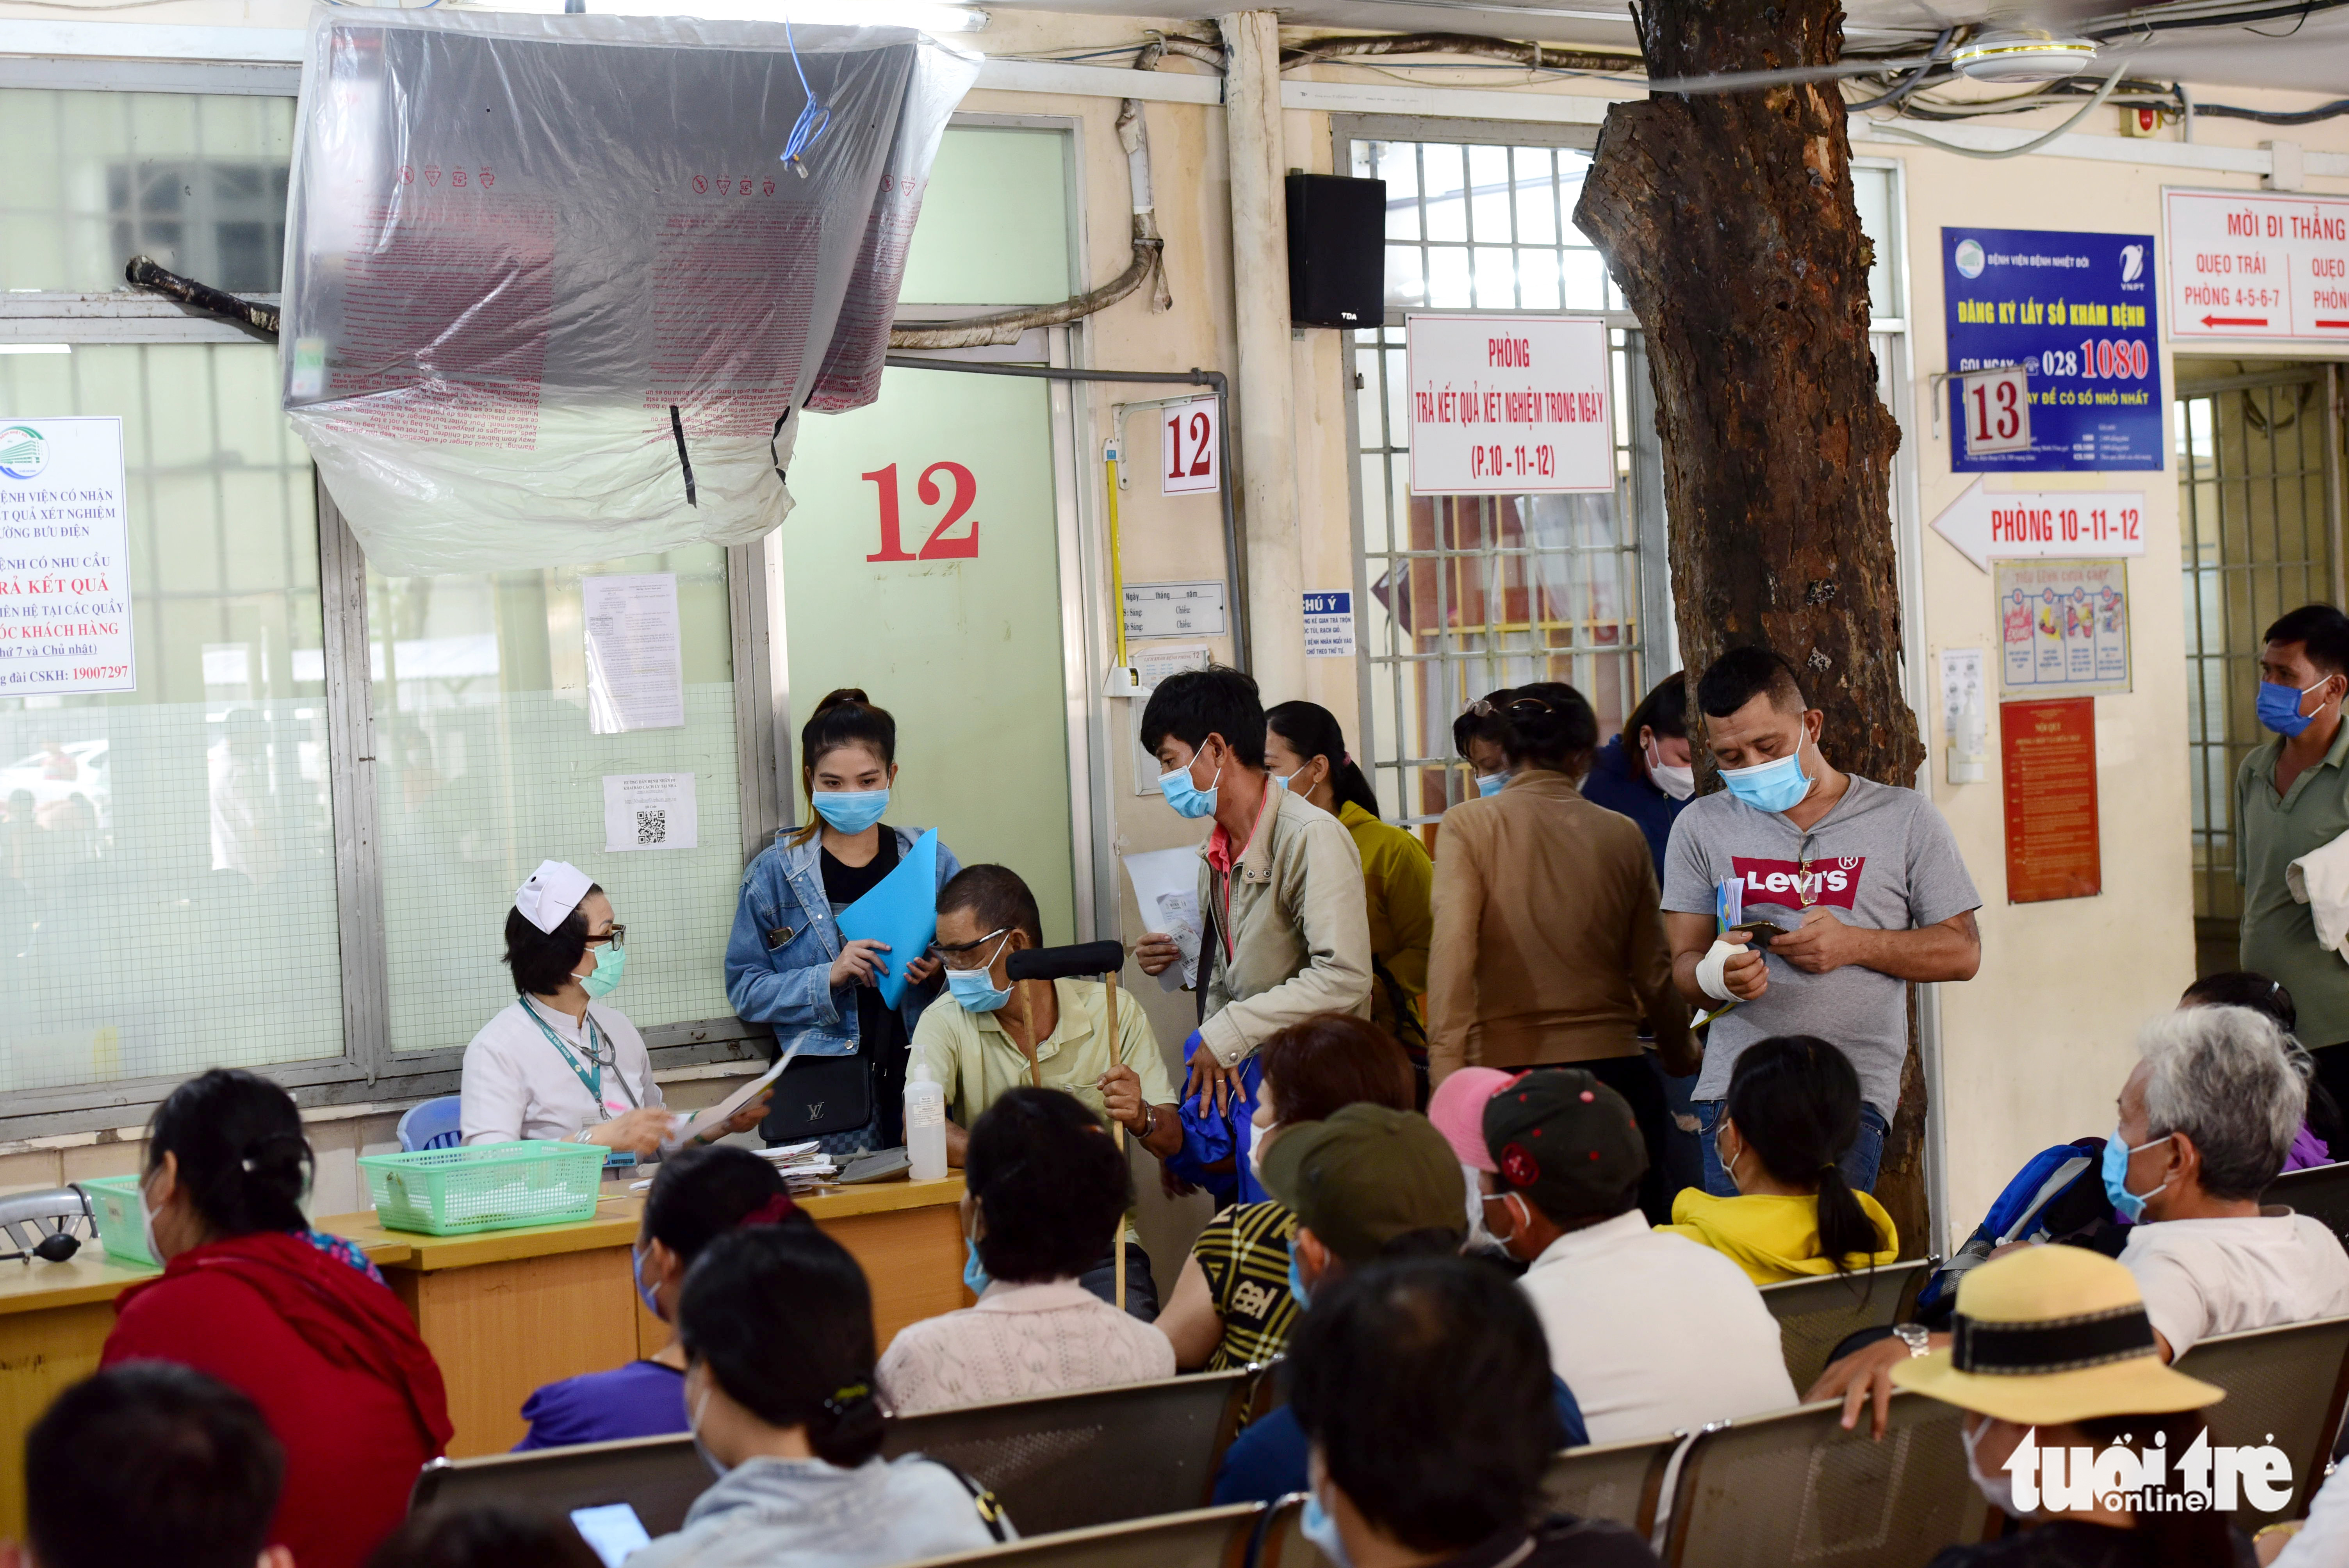 Patients wait for health checks at a prefabricated space, where a tree still remains, at the Ho Chi Minh City Hospital for Tropical Diseases. Photo: Duyen Phan / Tuoi Tre